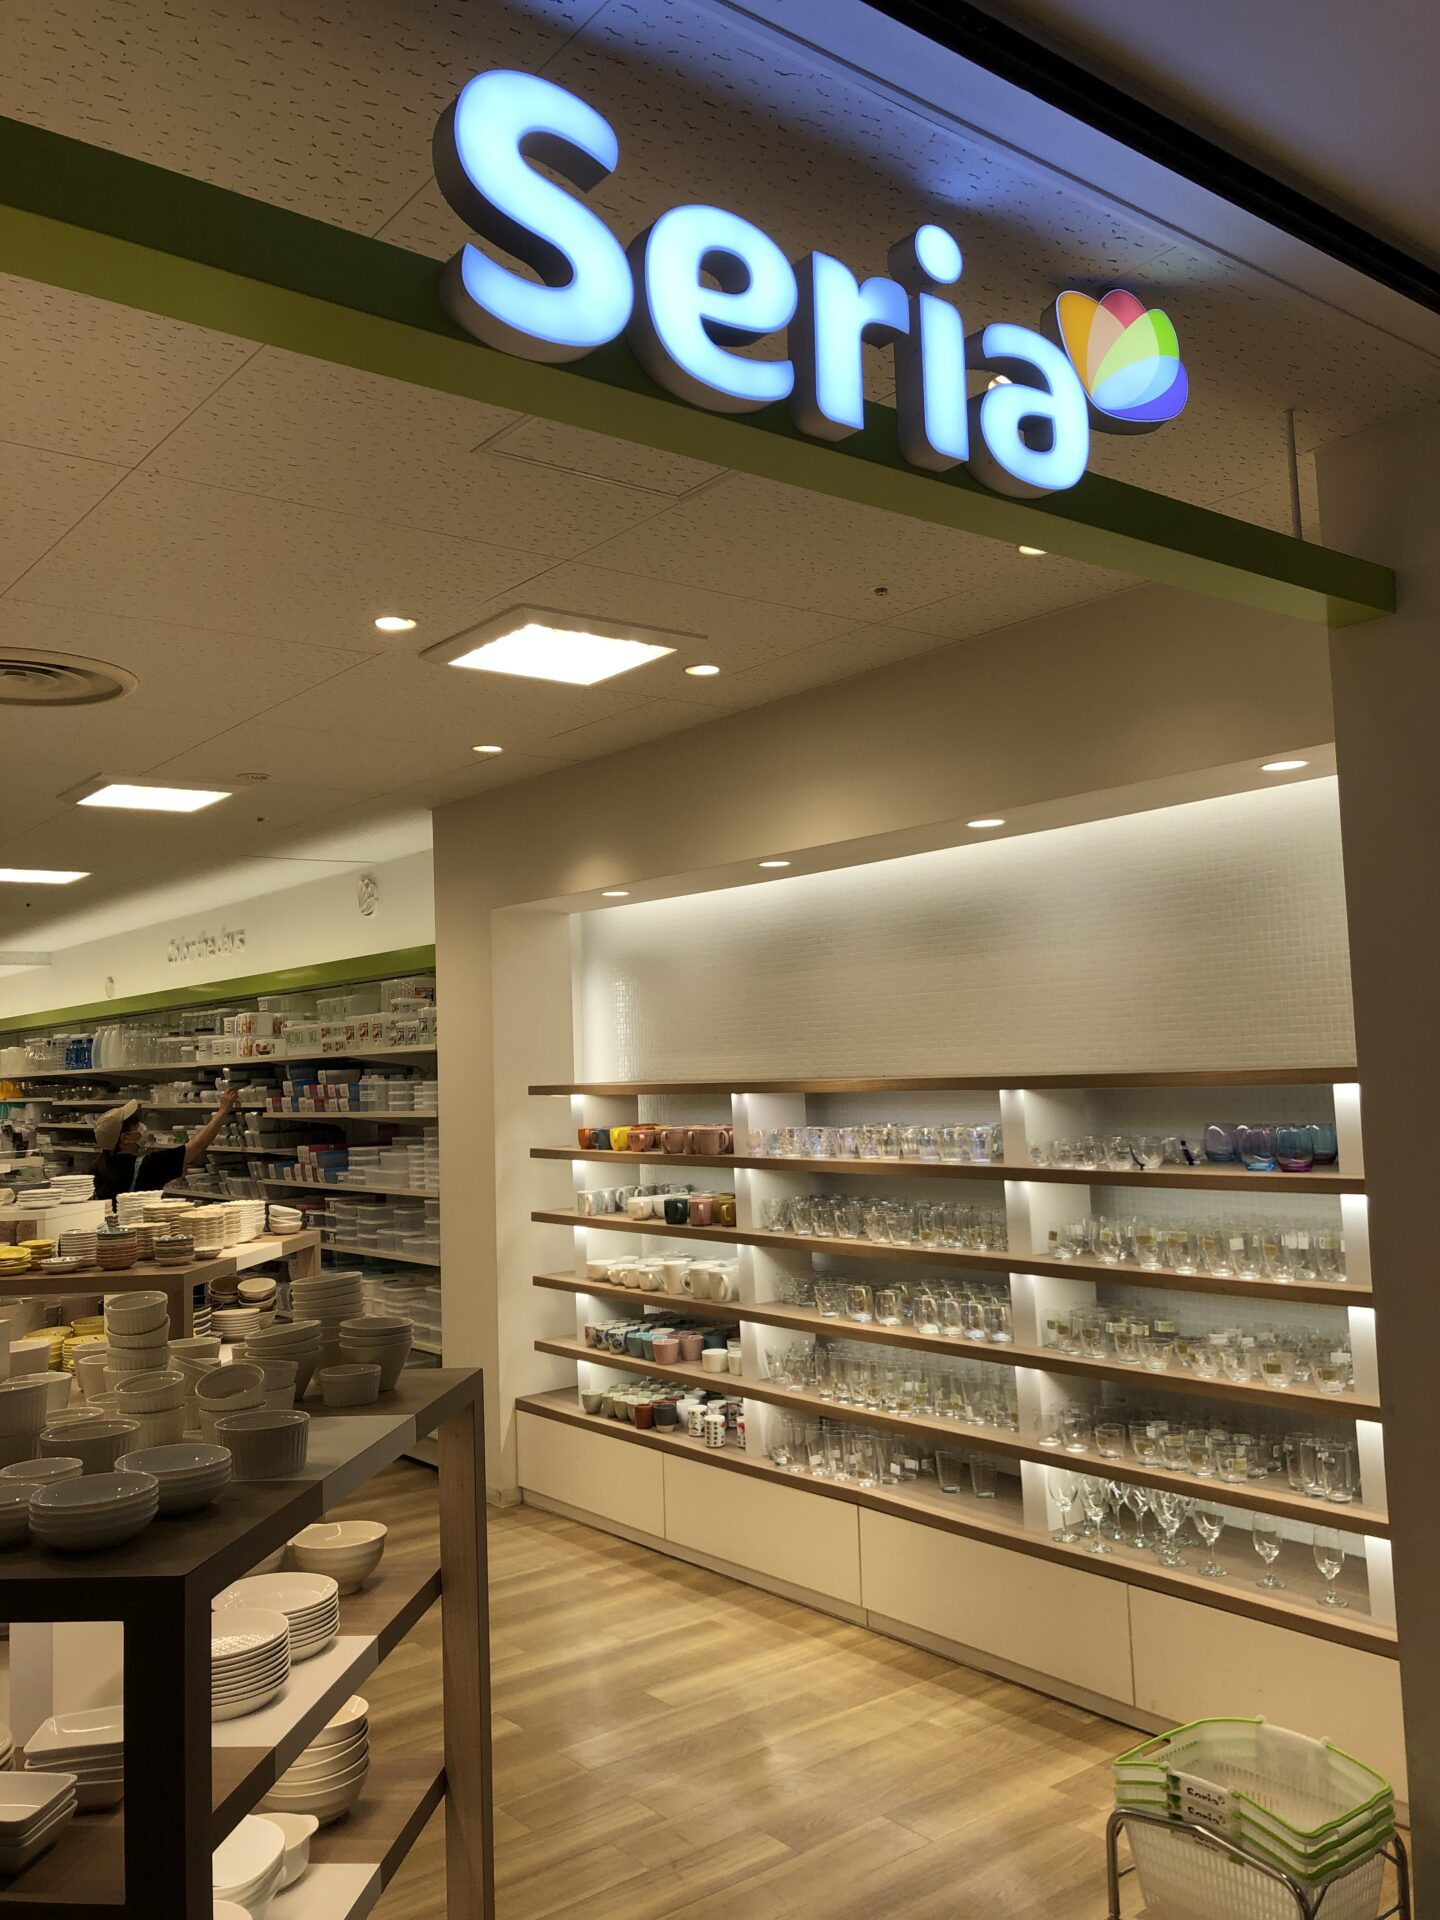 Seria at Ginza, a 100-yen store in Ginza, Exit  Melsa Ginza store